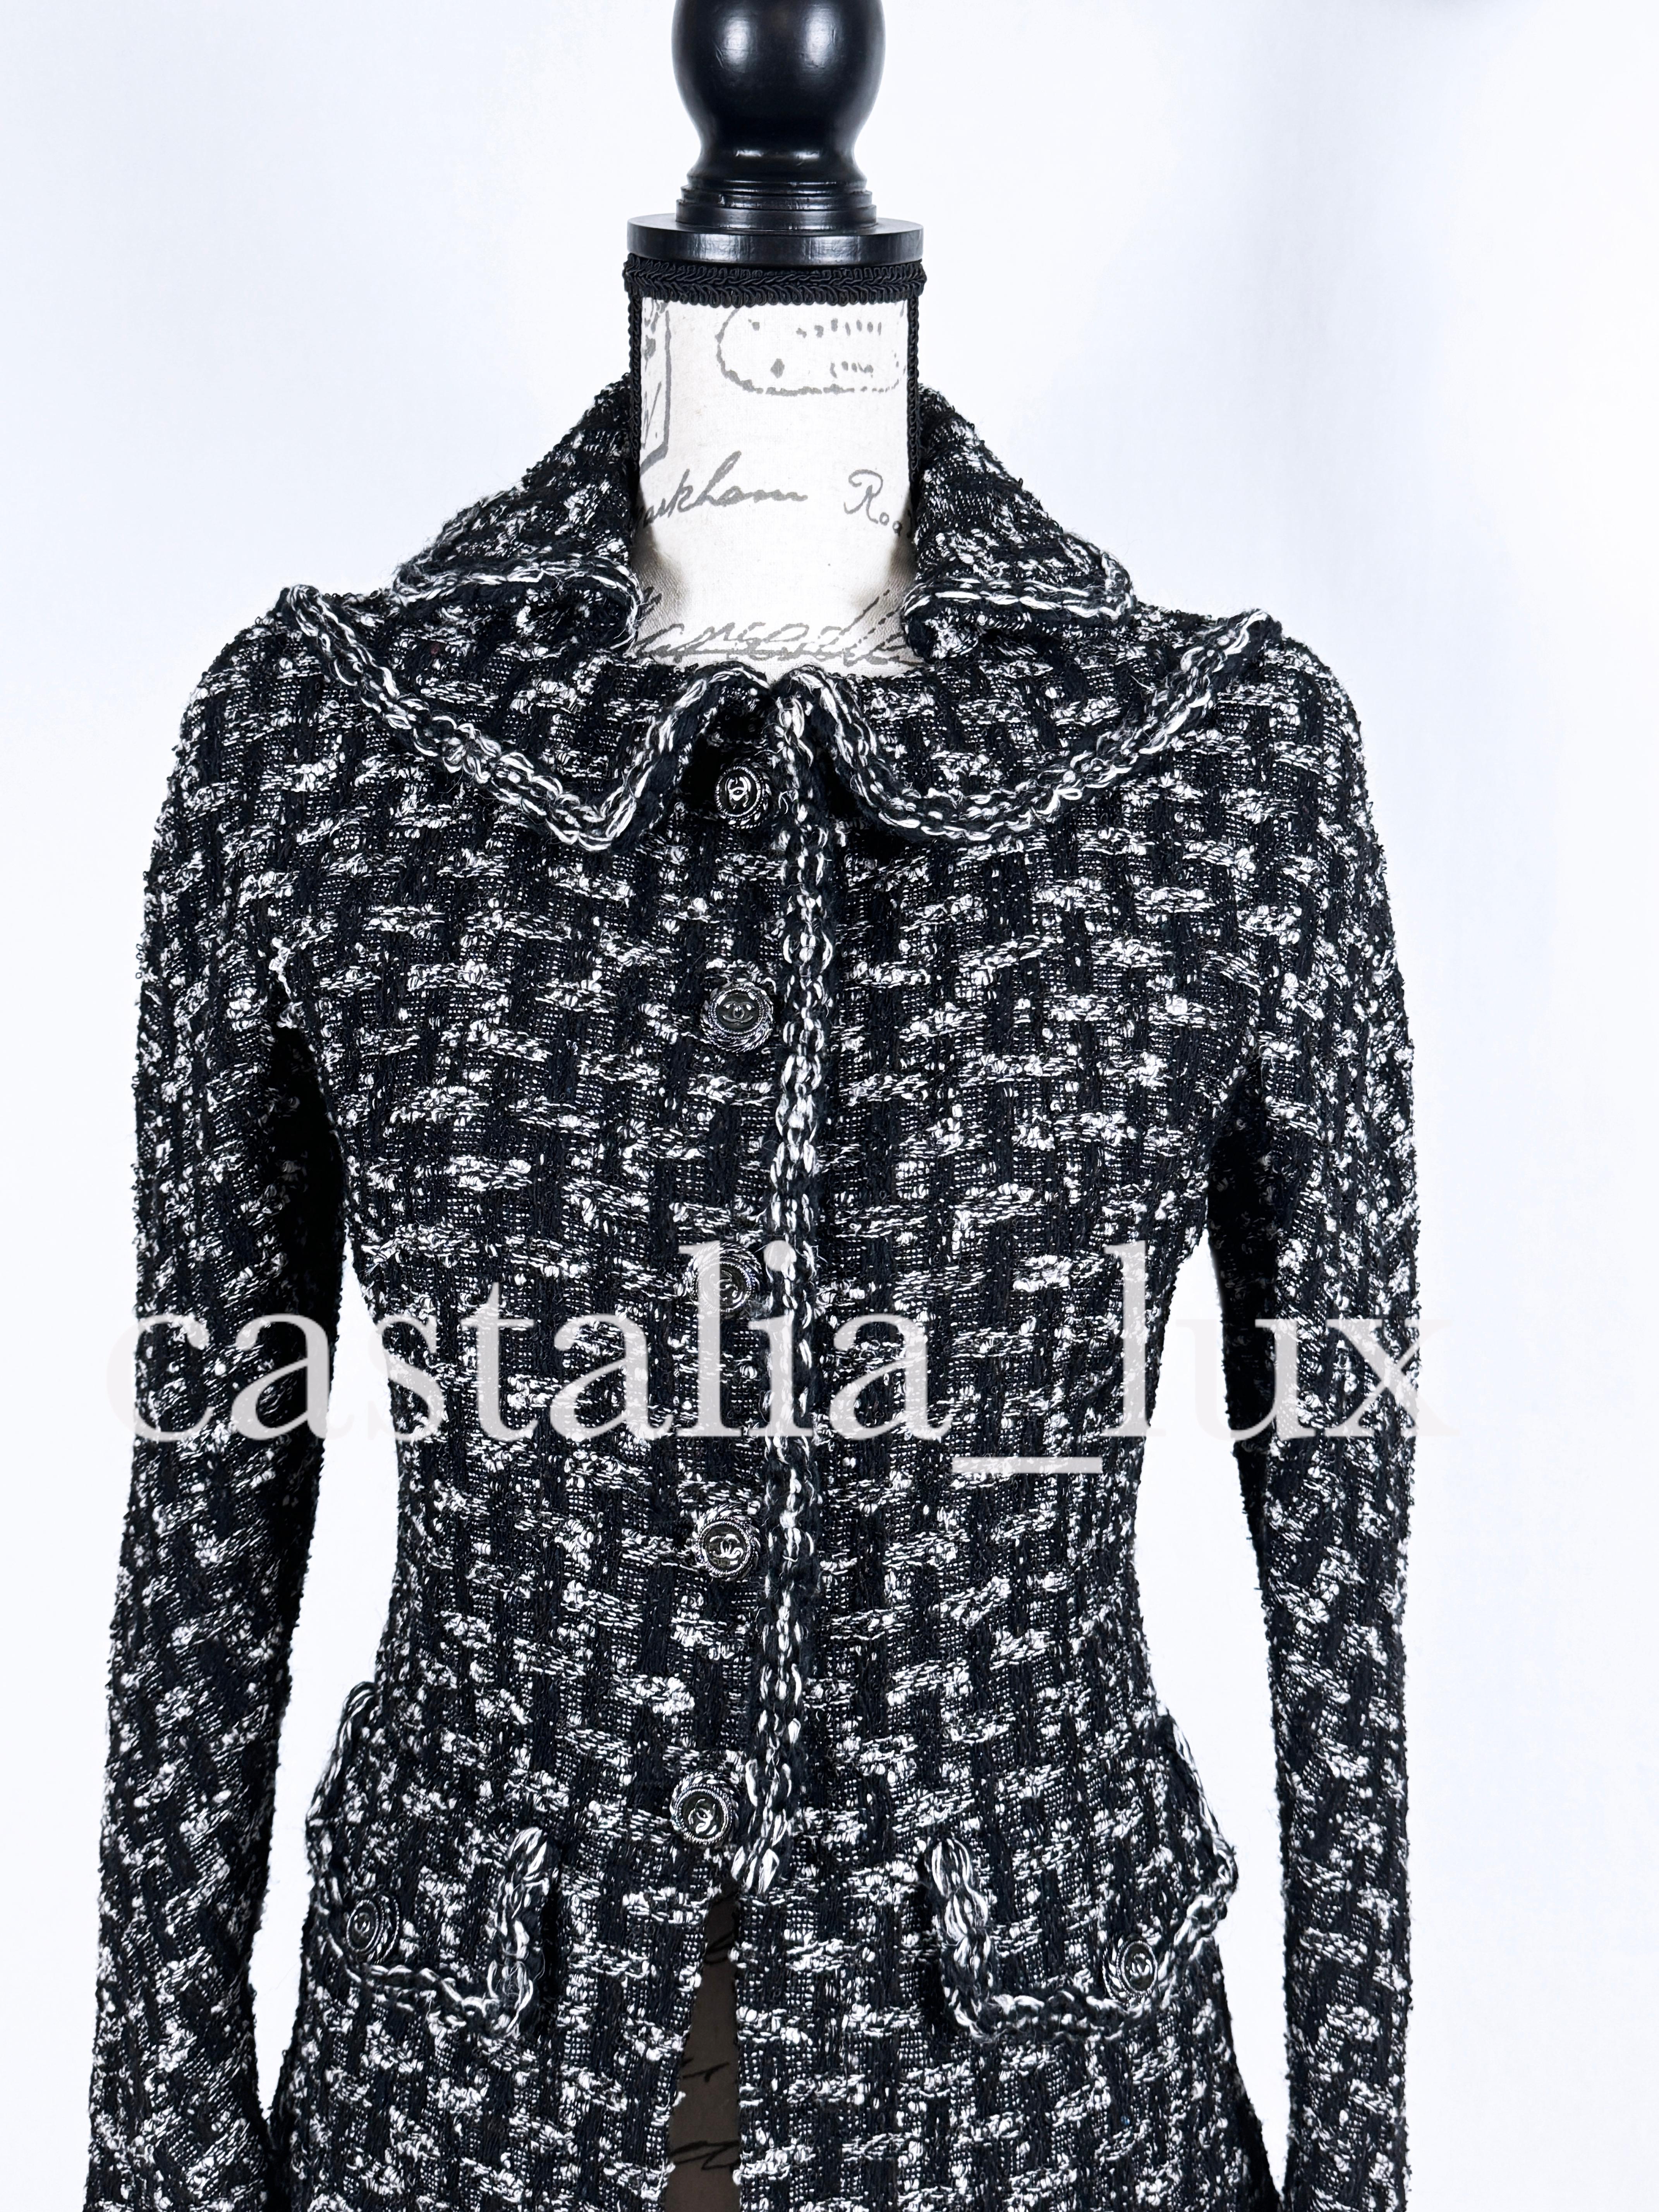 Iconic Chanel black tweed jacket with massive CC logo buttons from Paris / EDINBURGH Collection by Karl Lagerfeld. 
- boutique price over 9,000$
- signature braided trim
- black silk lining with camellias, chain link at hem
Size mark 36 FR. Kept